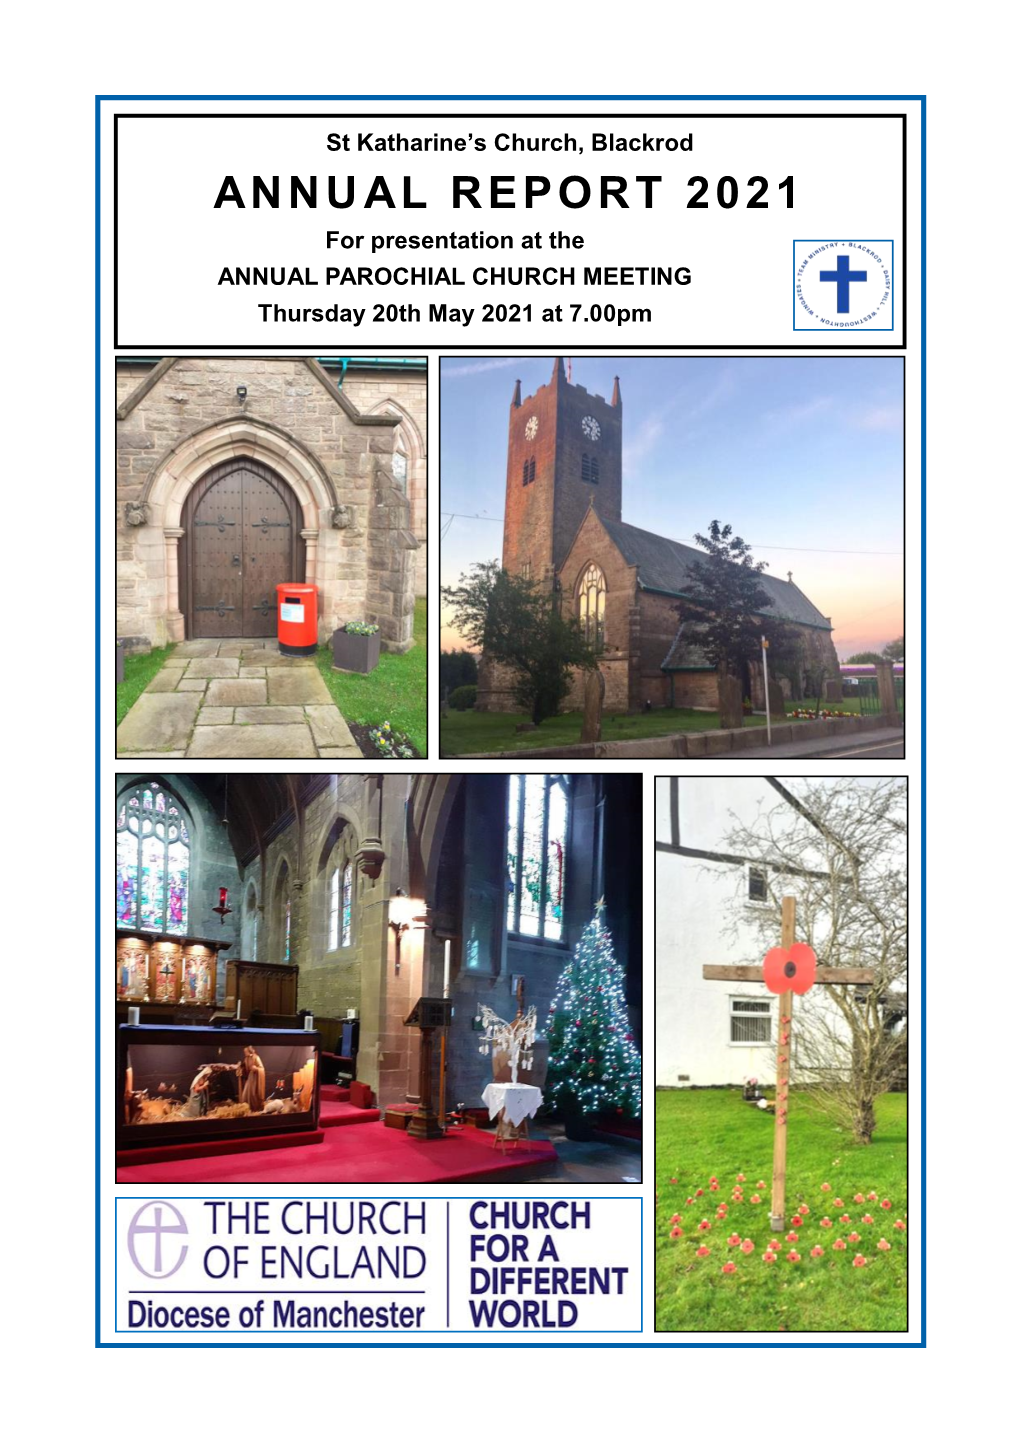 ANNUAL REPORT 2021 for Presentation at the ANNUAL PAROCHIAL CHURCH MEETING Thursday 20Th May 2021 at 7.00Pm